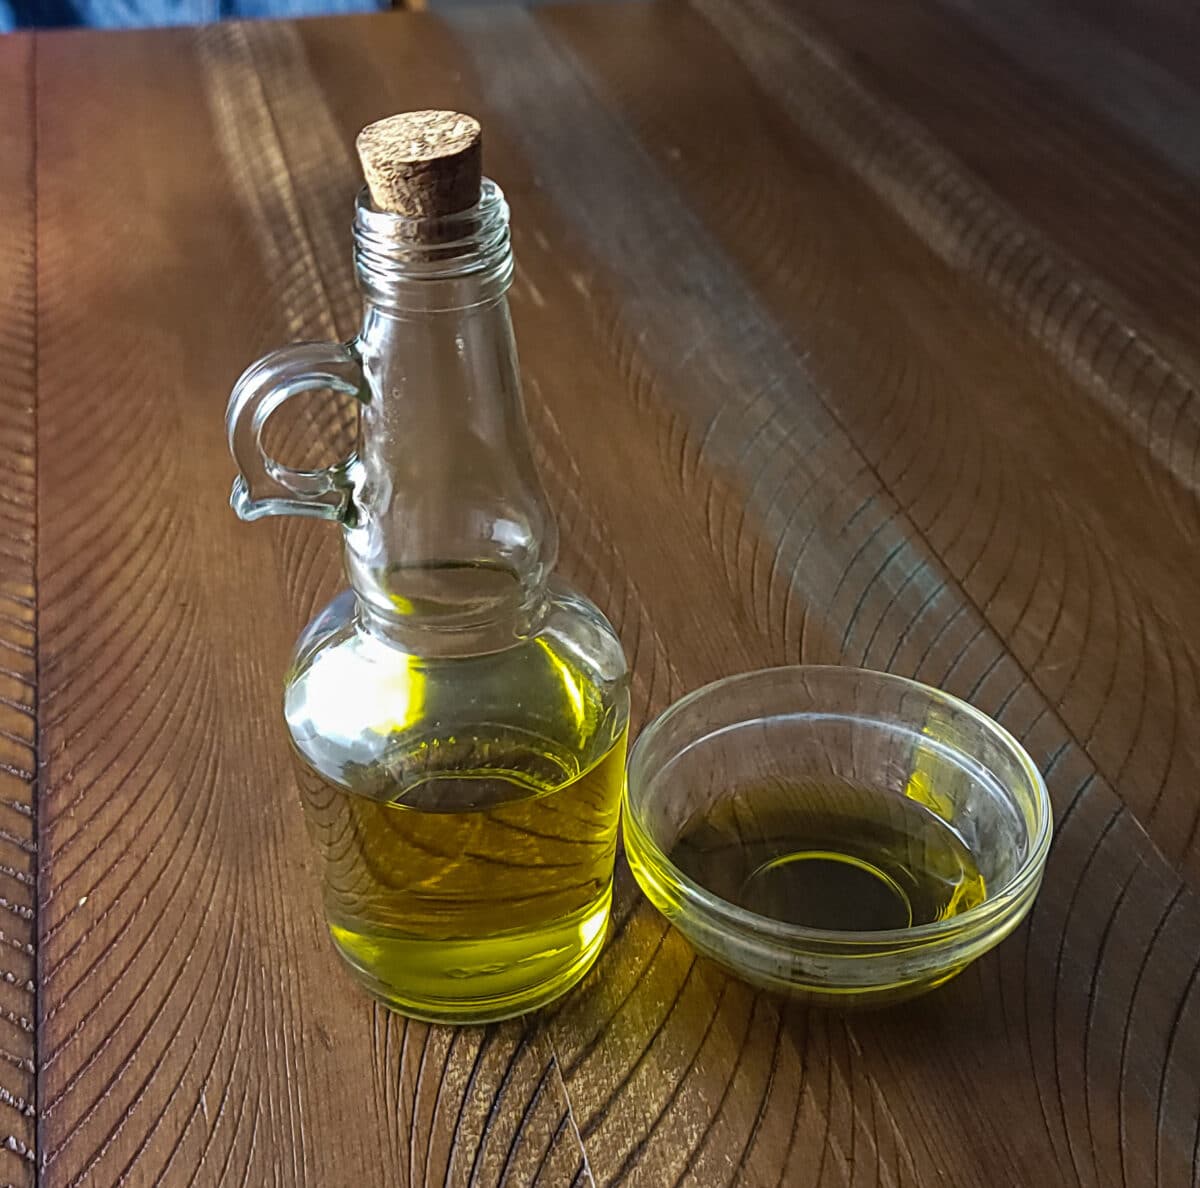 olive oil in a dipping saucer and a glass bottle